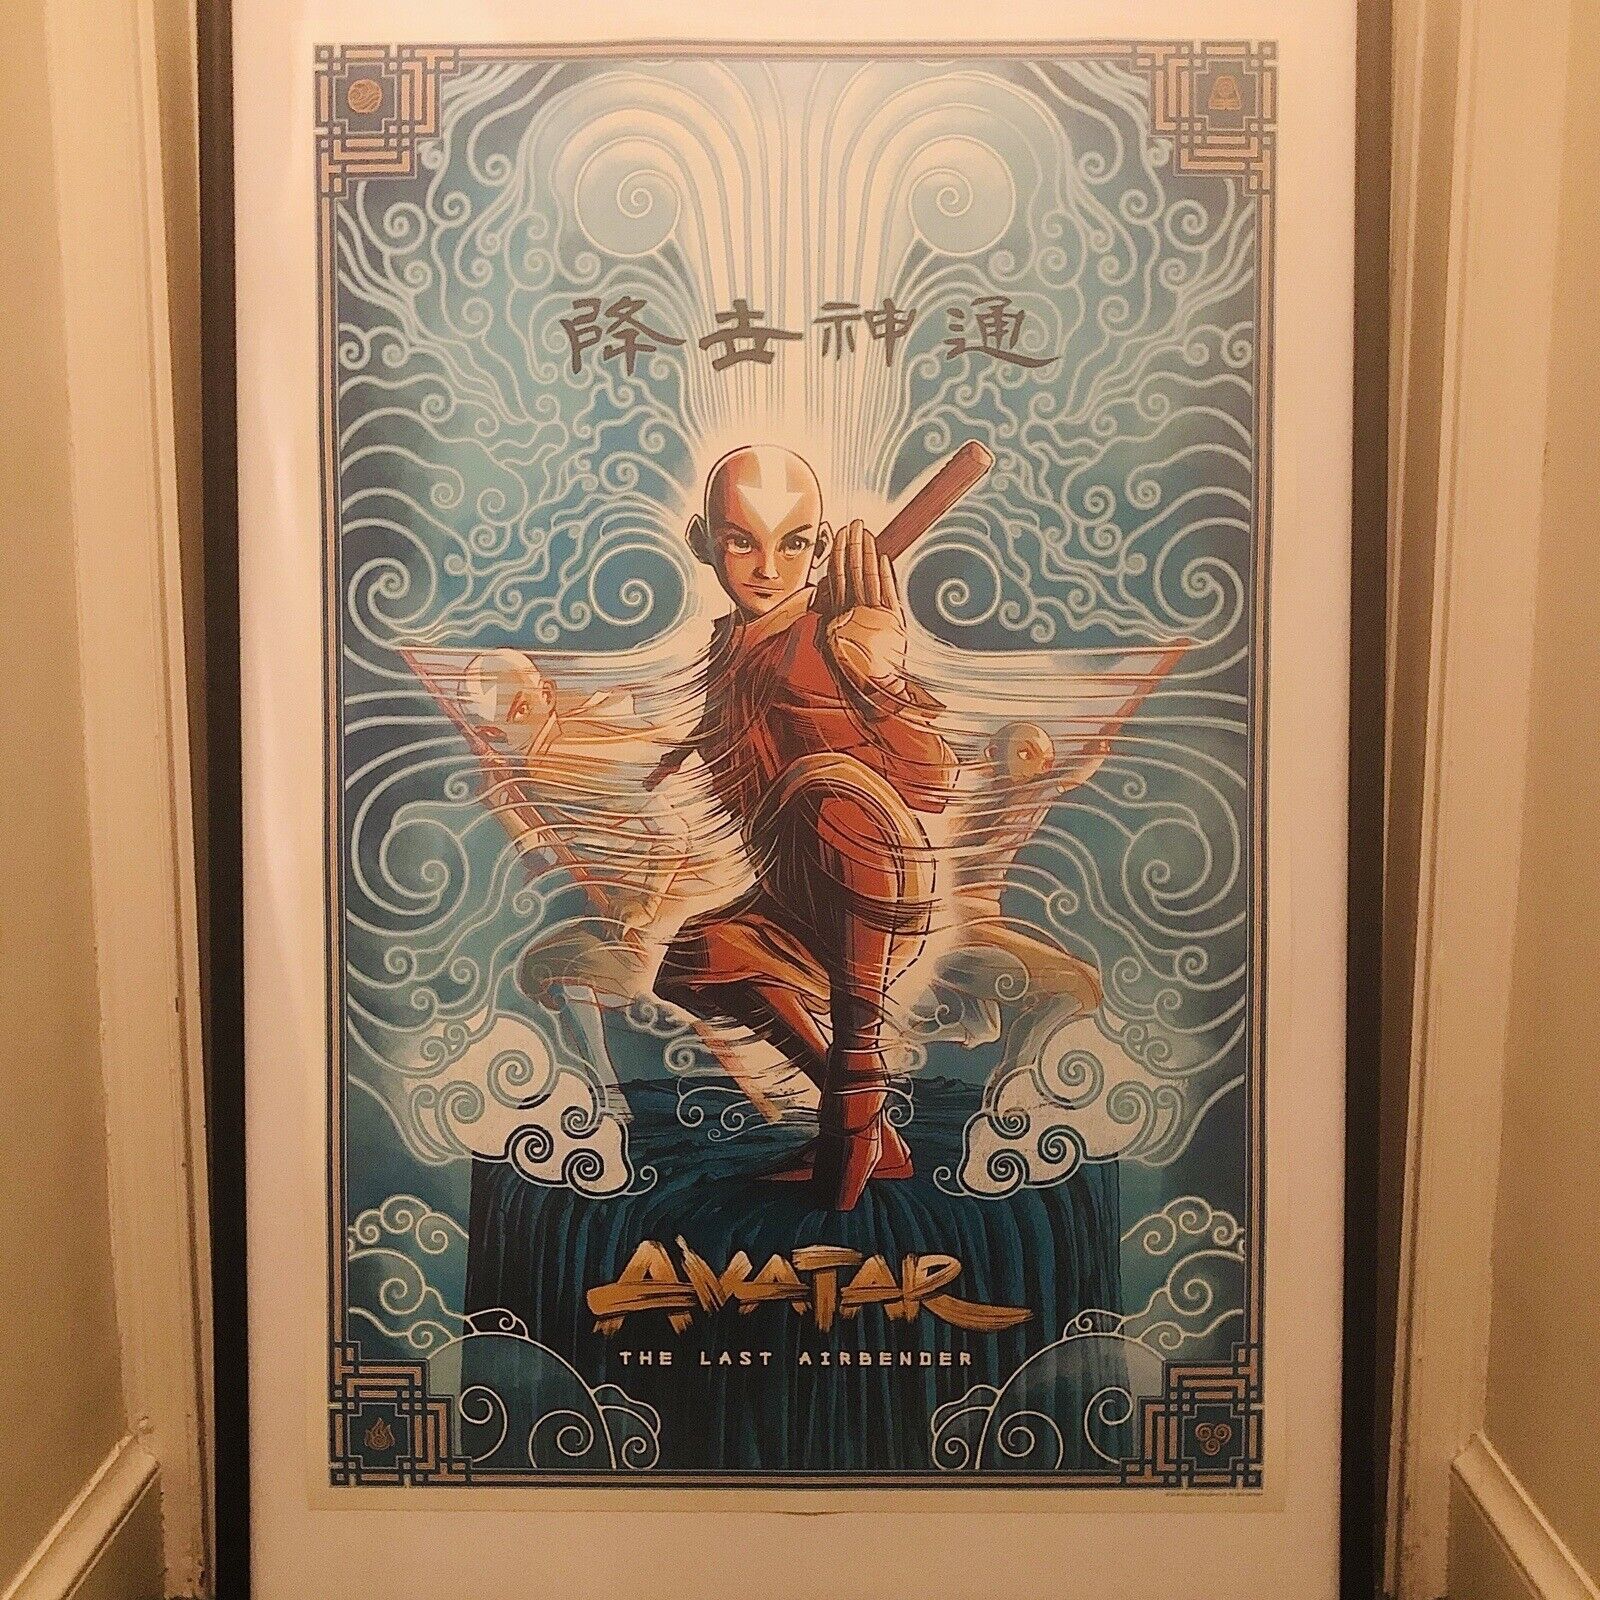 Avatar: The Last Airbender MONDO Art Print Poster Limited Numbered 3/225 - 24x36